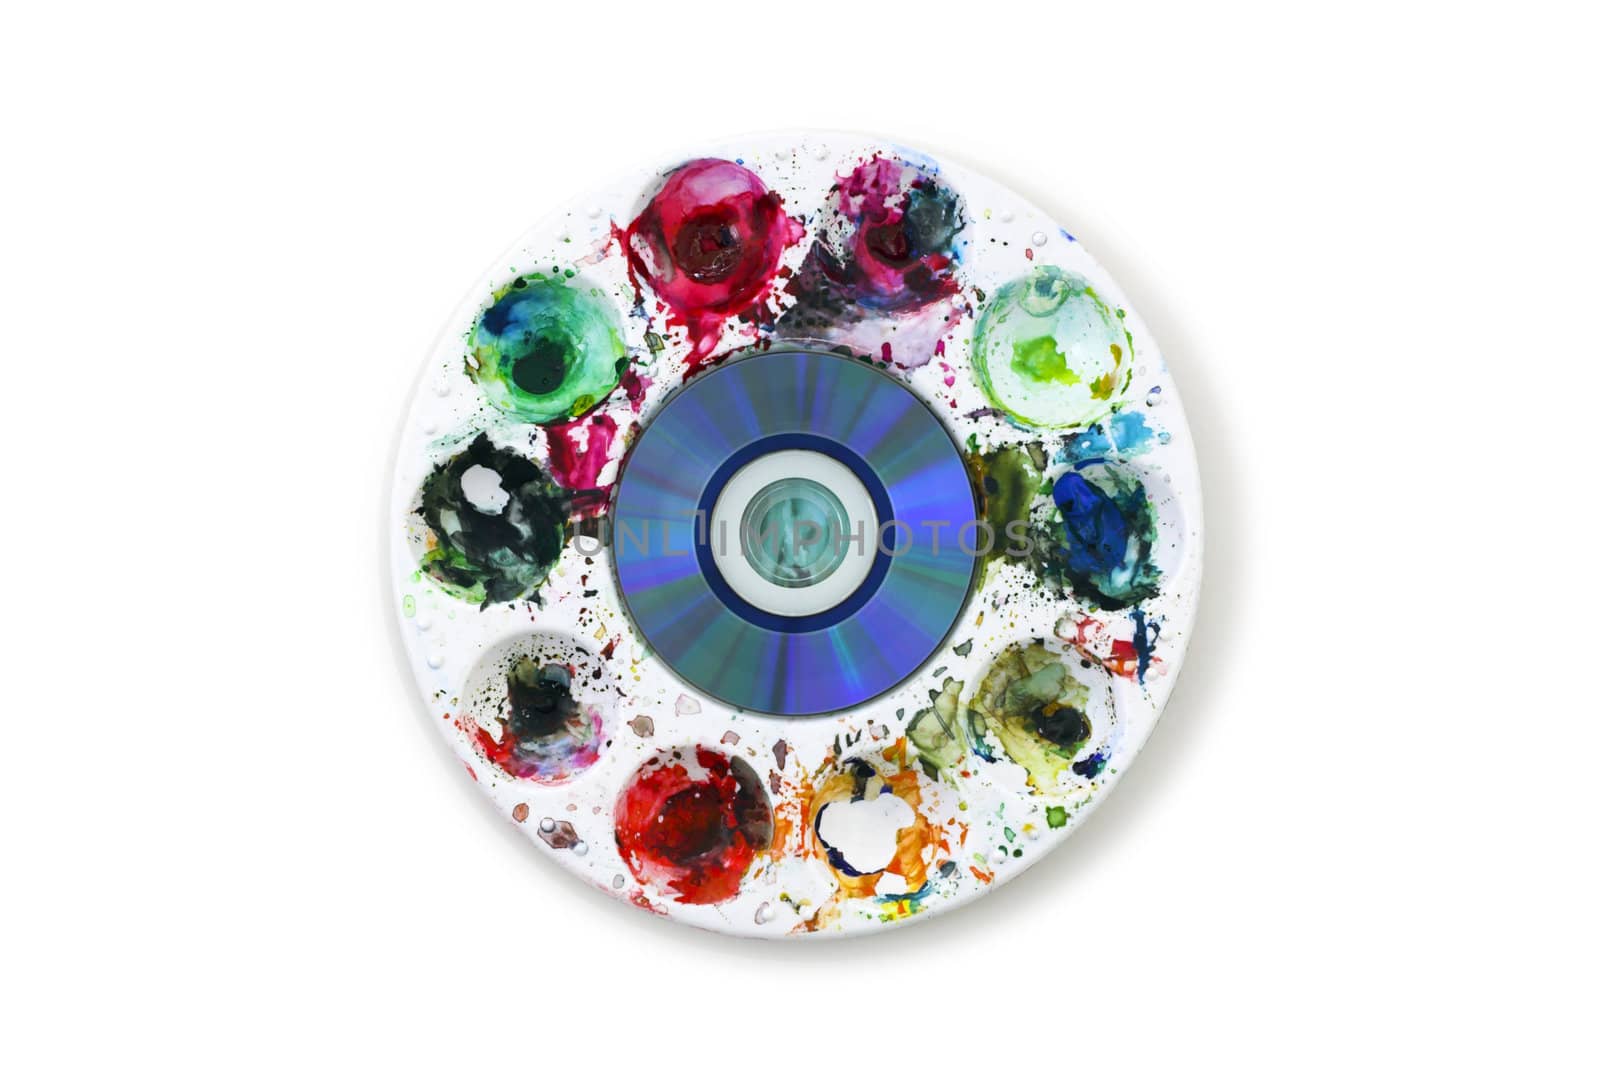 Computer compact disk, CD, positioned in the middle of the artists palette 